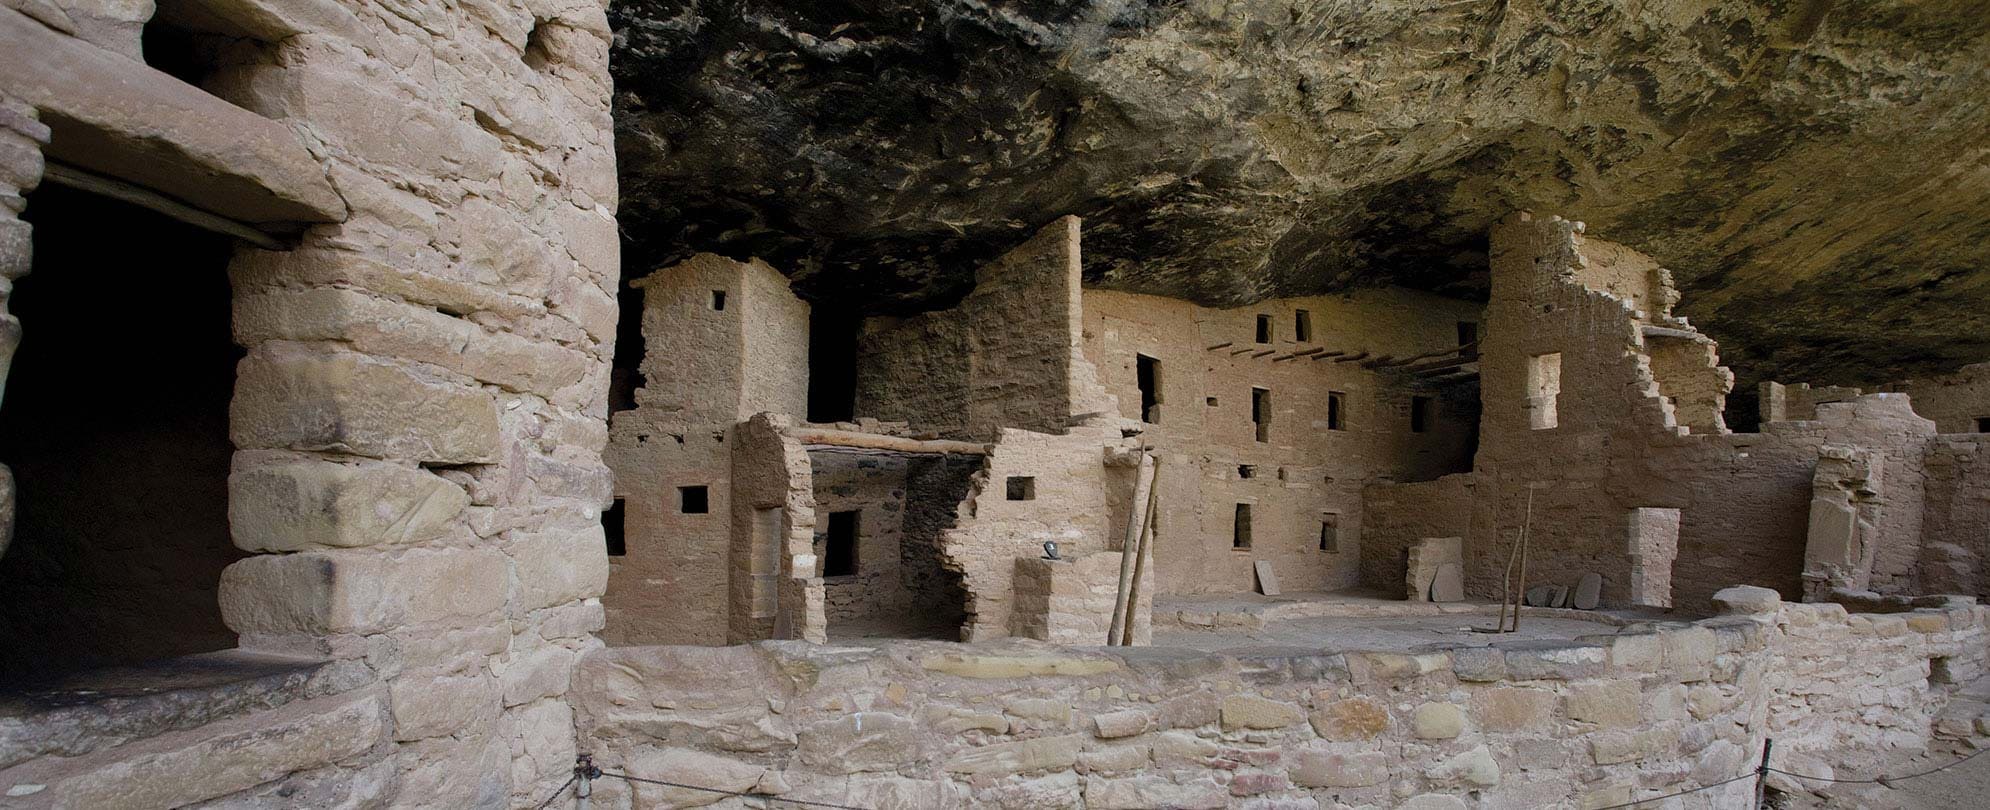 One of the ancient Pueblo people cliff dwellings at Mesa Verde National Park in Colorado